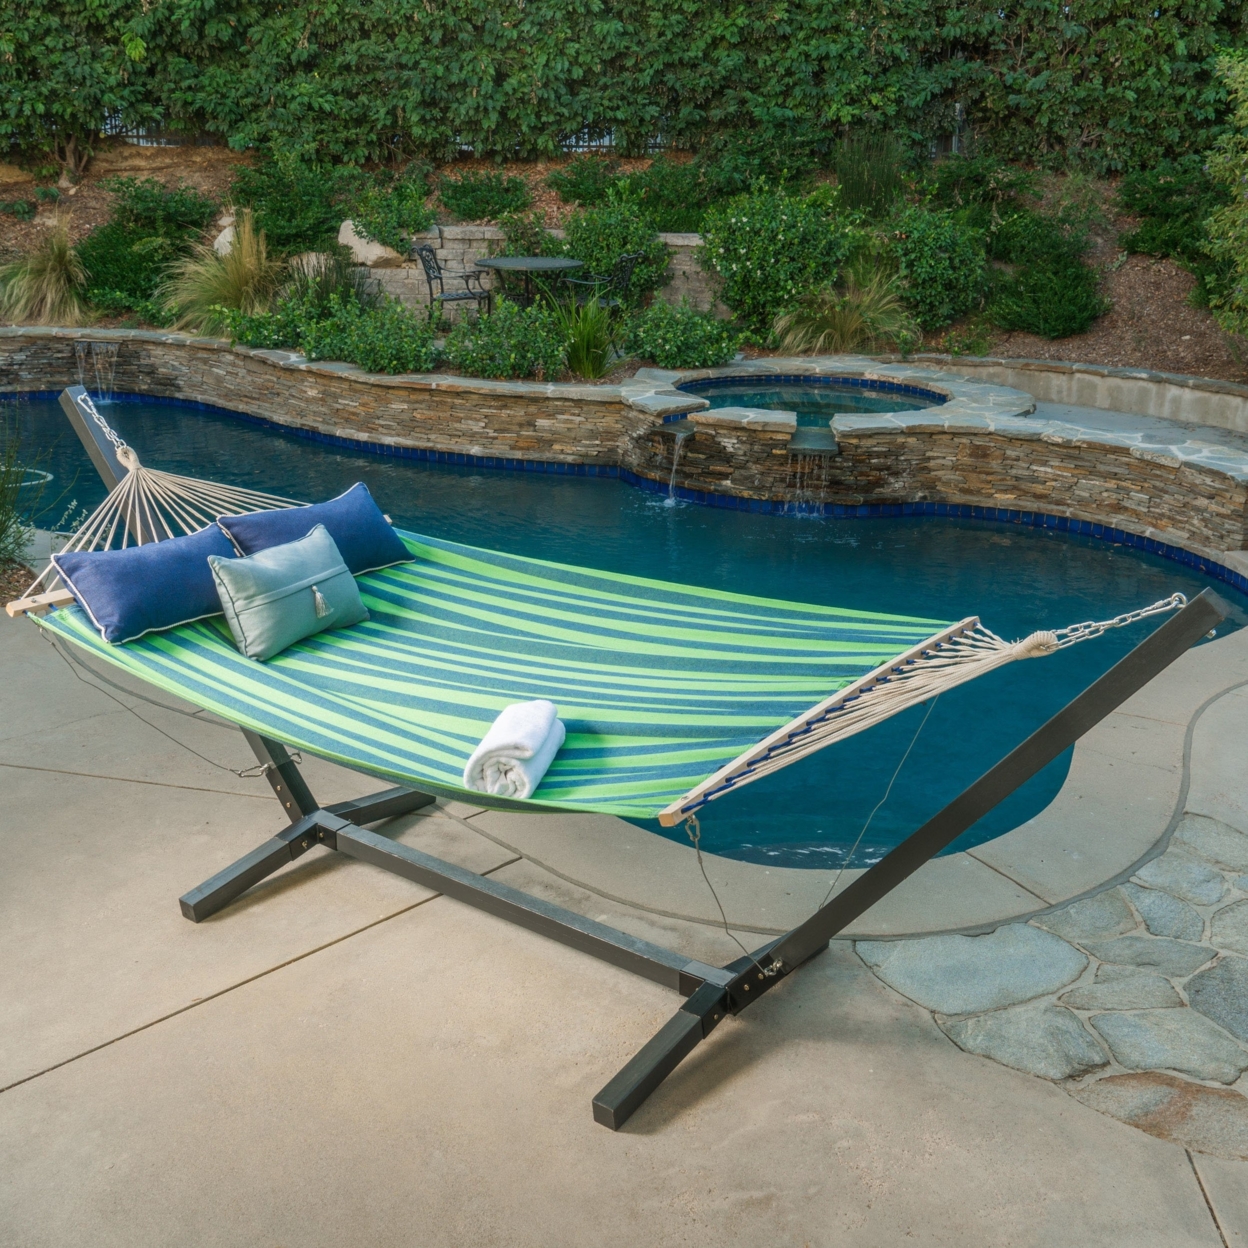 Weston Outdoor Water Resistant Hammock With Larch Wood Frame - Blue/green Striped